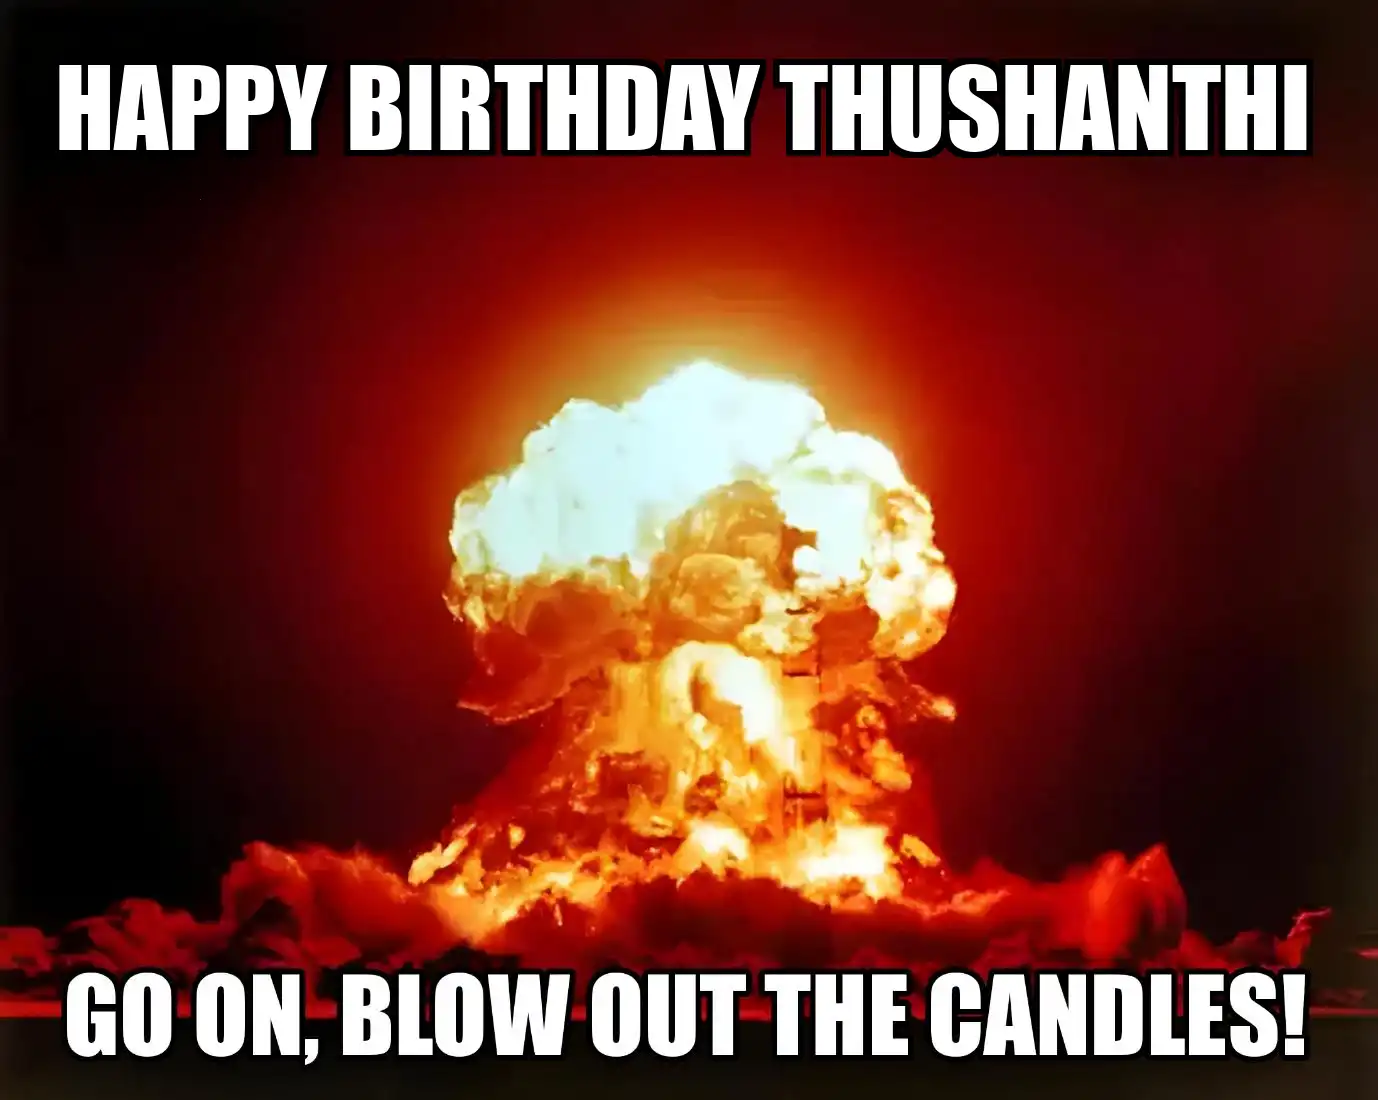 Happy Birthday Thushanthi Go On Blow Out The Candles Meme